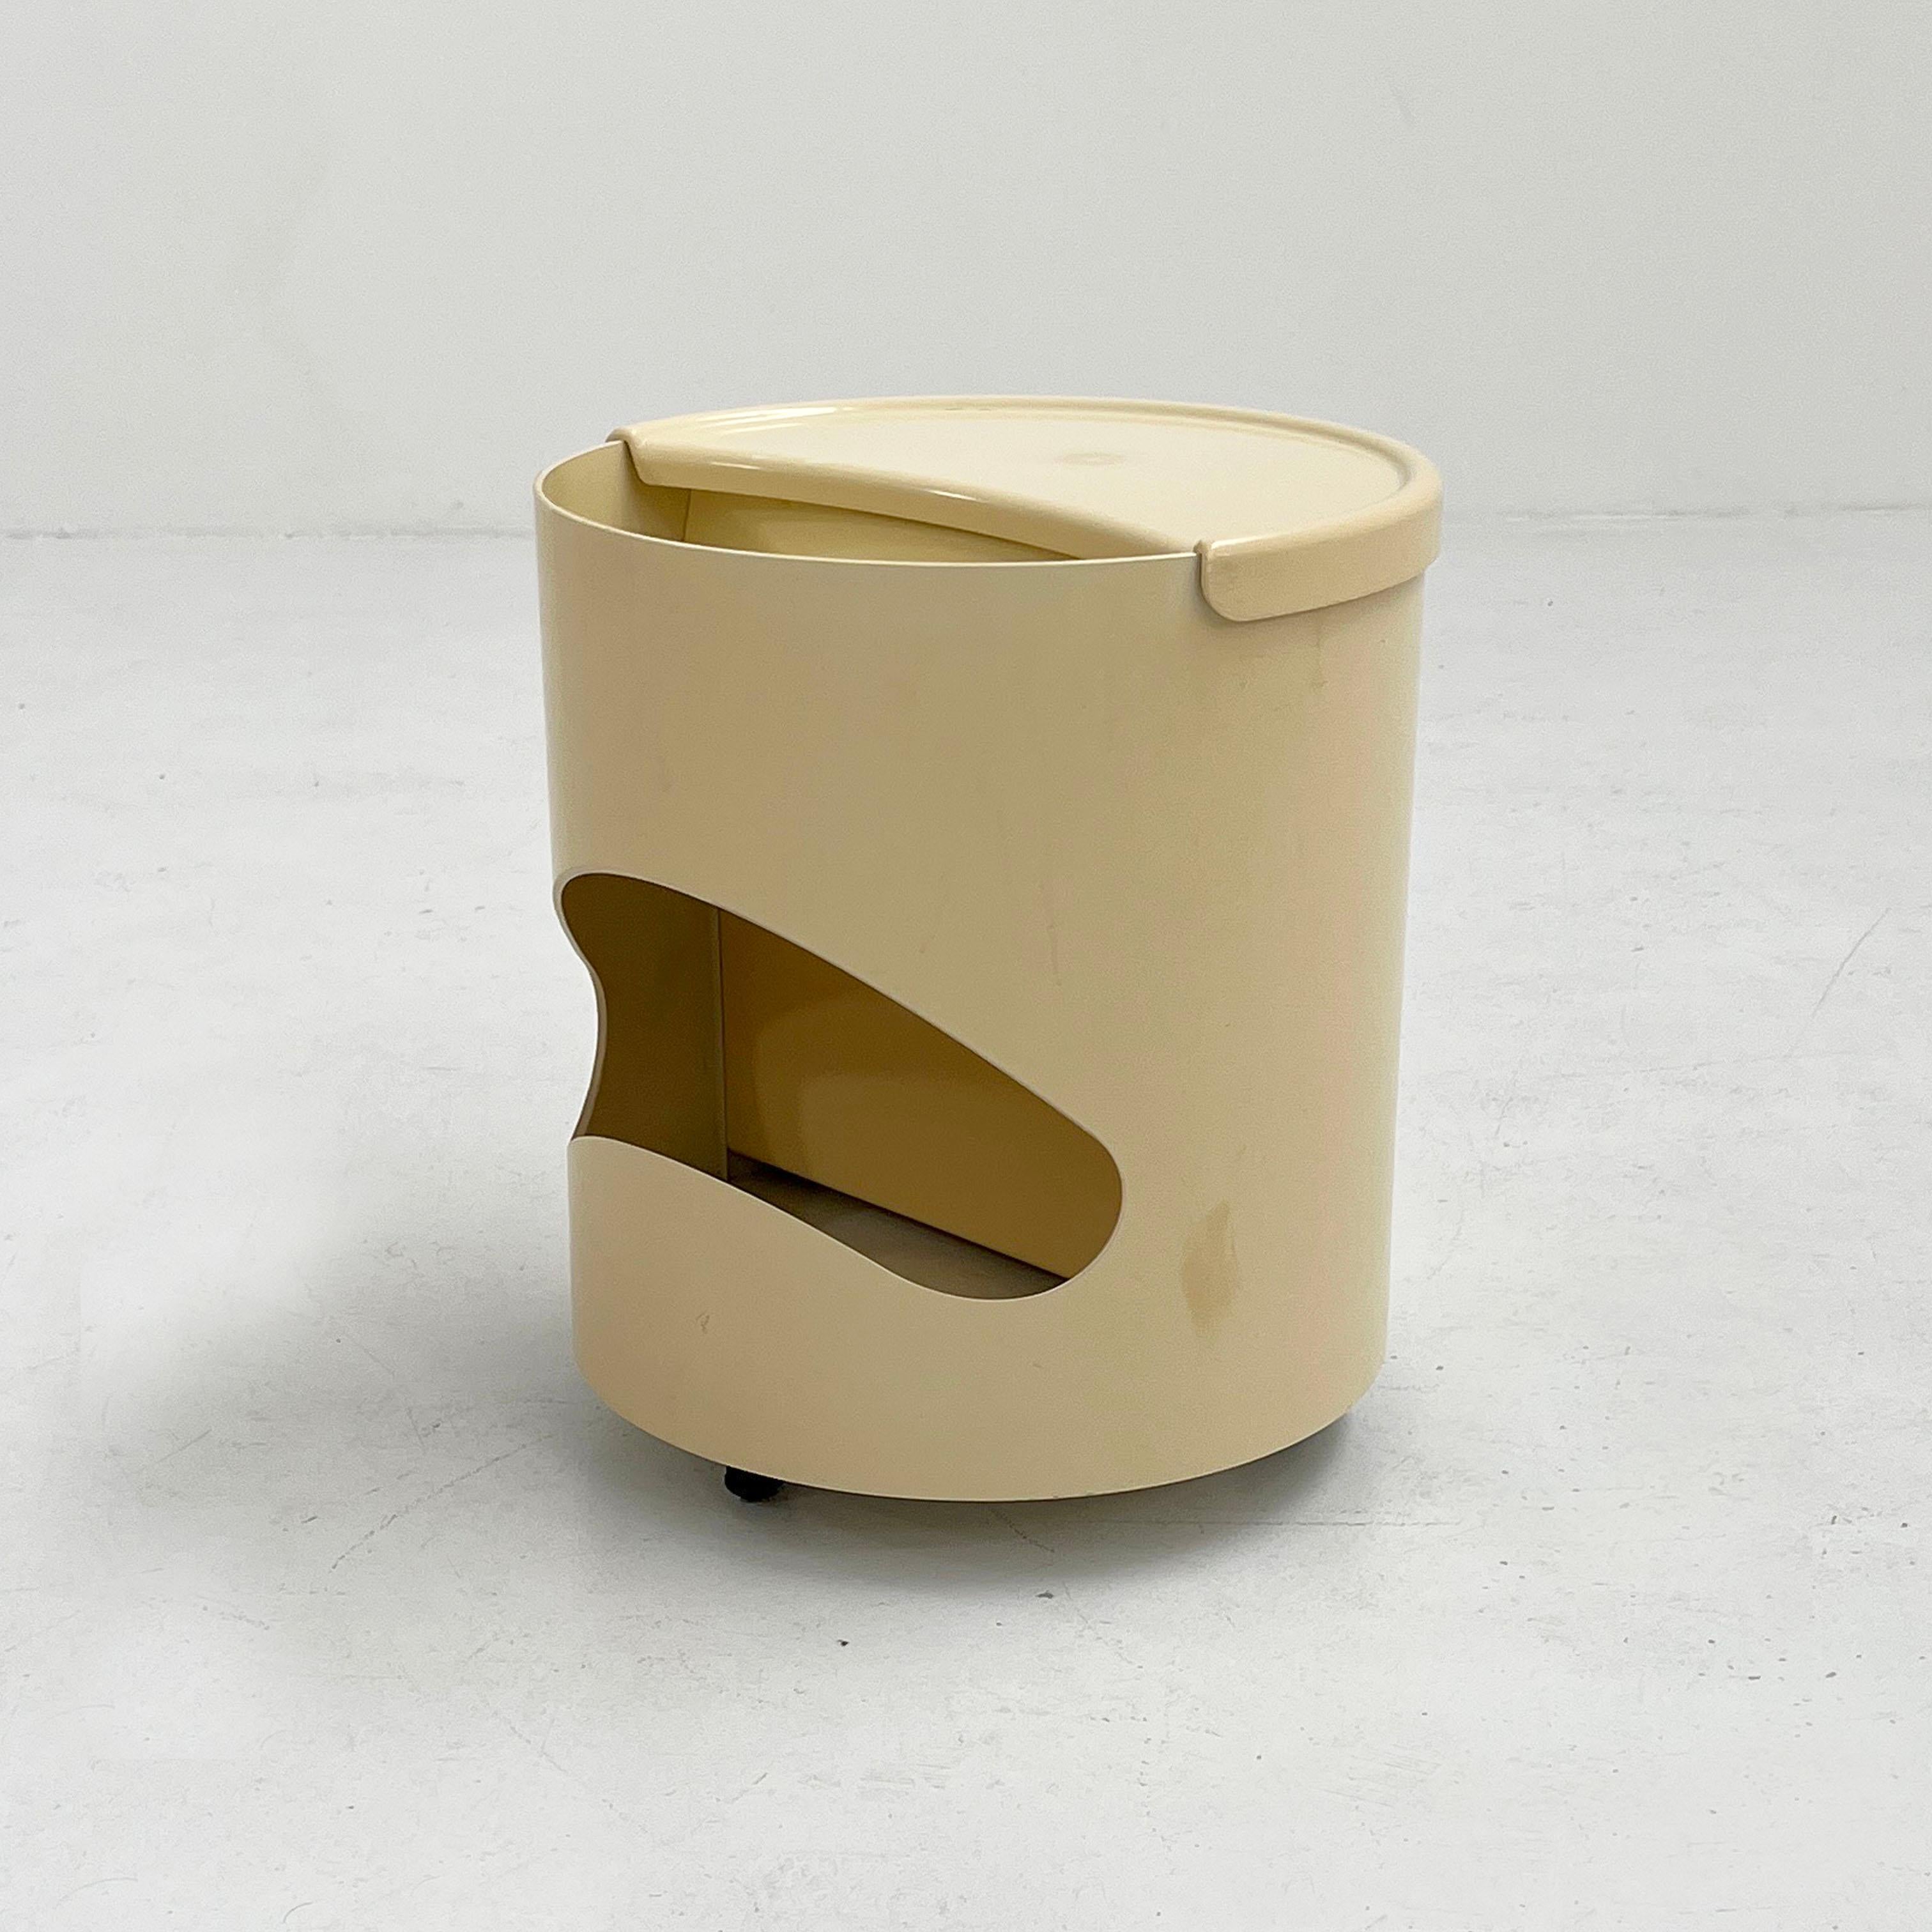 Designer - Joe Colombo
Producer - Elco
Model - Robo Side Table
Design Period - Seventies
Measurements - Width 39 cm x Depth 39 cm x Height 44 cm
Materials - Plastic
Color - White
Light wear consistent with age and use. Yellowing of the